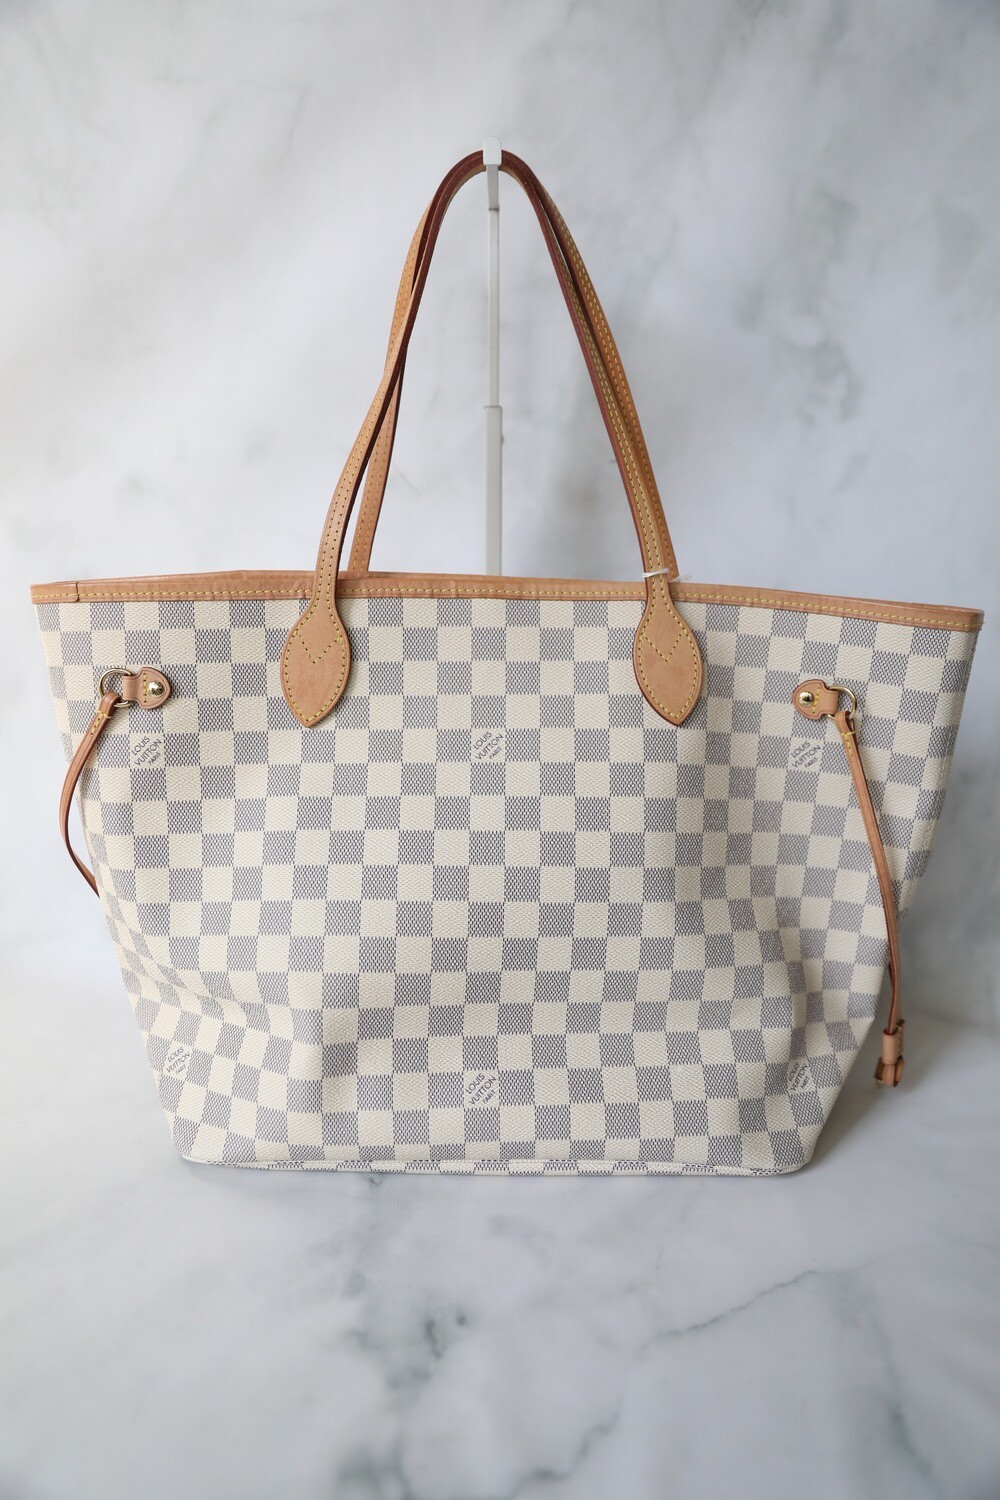 Louis Vuitton Neverfull MM Azur with Strap, New in Dustbag - Julia Rose  Boston